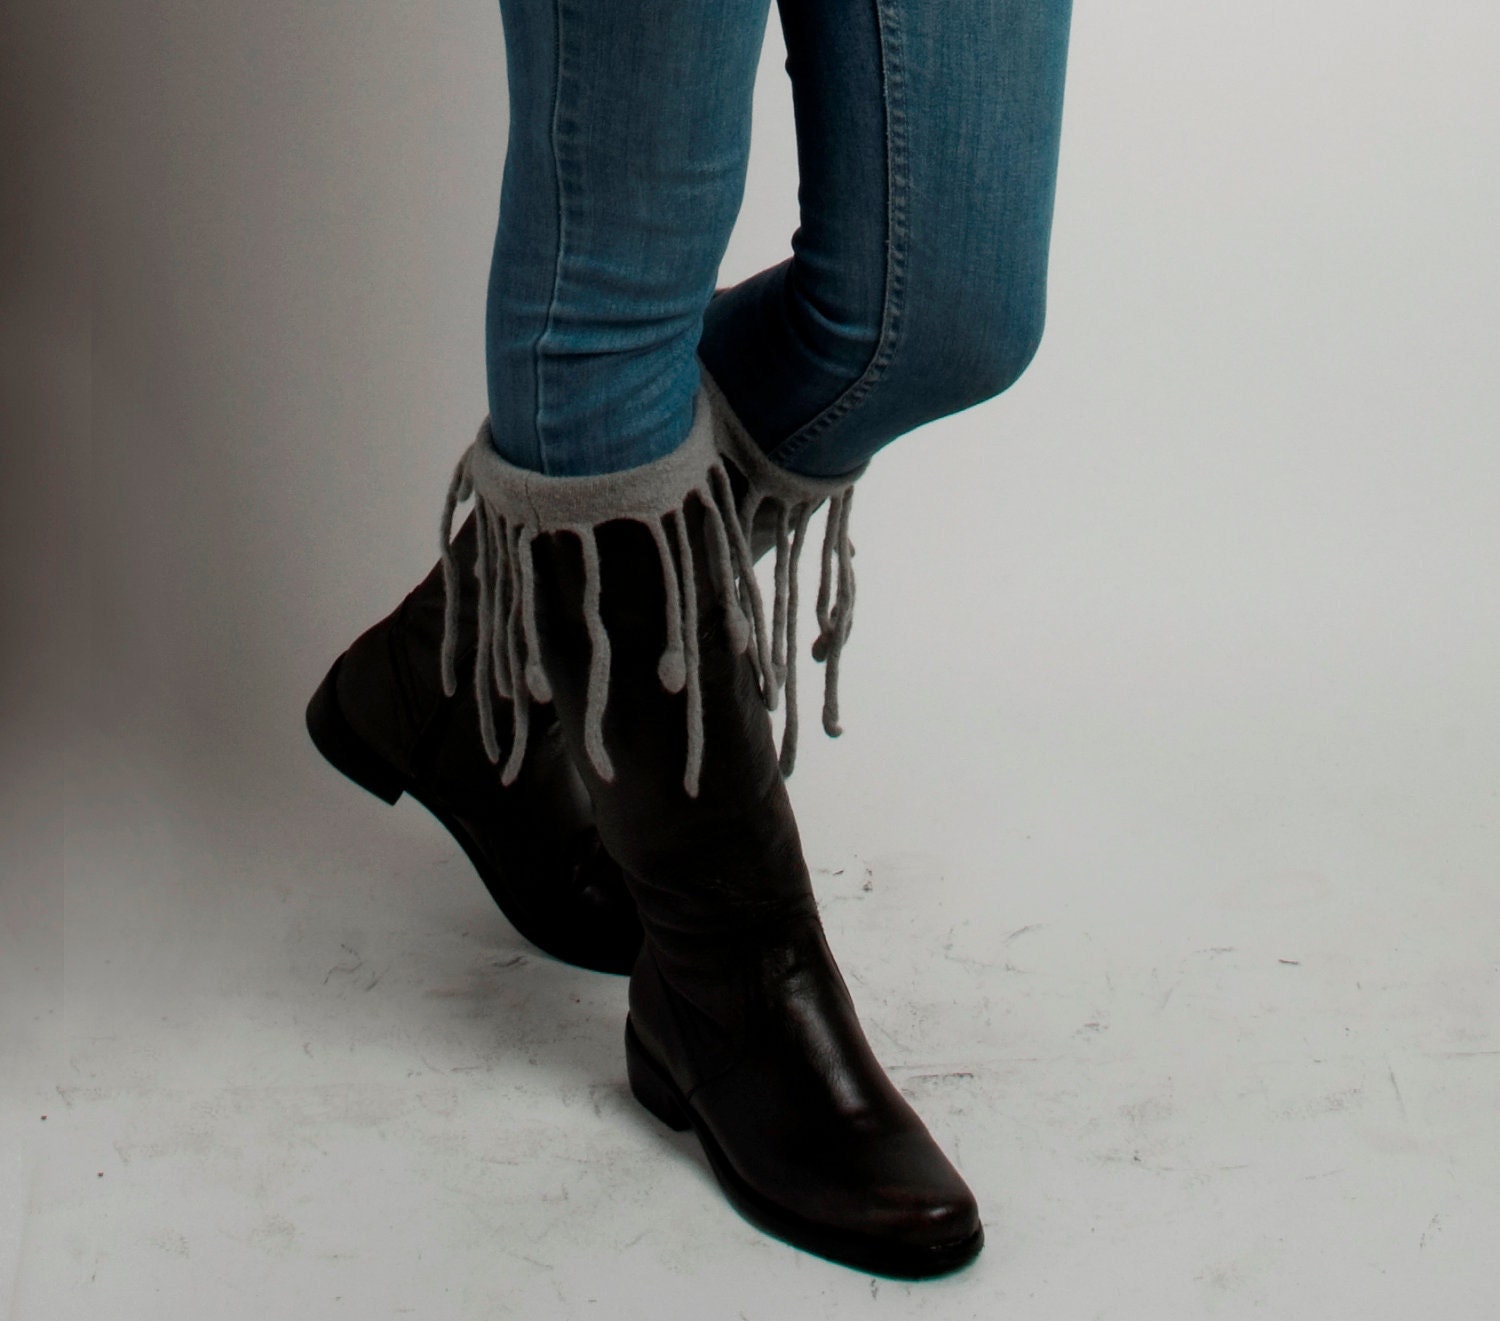 Boot socks, Boot cuffs, fringed Grey Leg warmer wool felt with fringes and tassels at the end - texturable